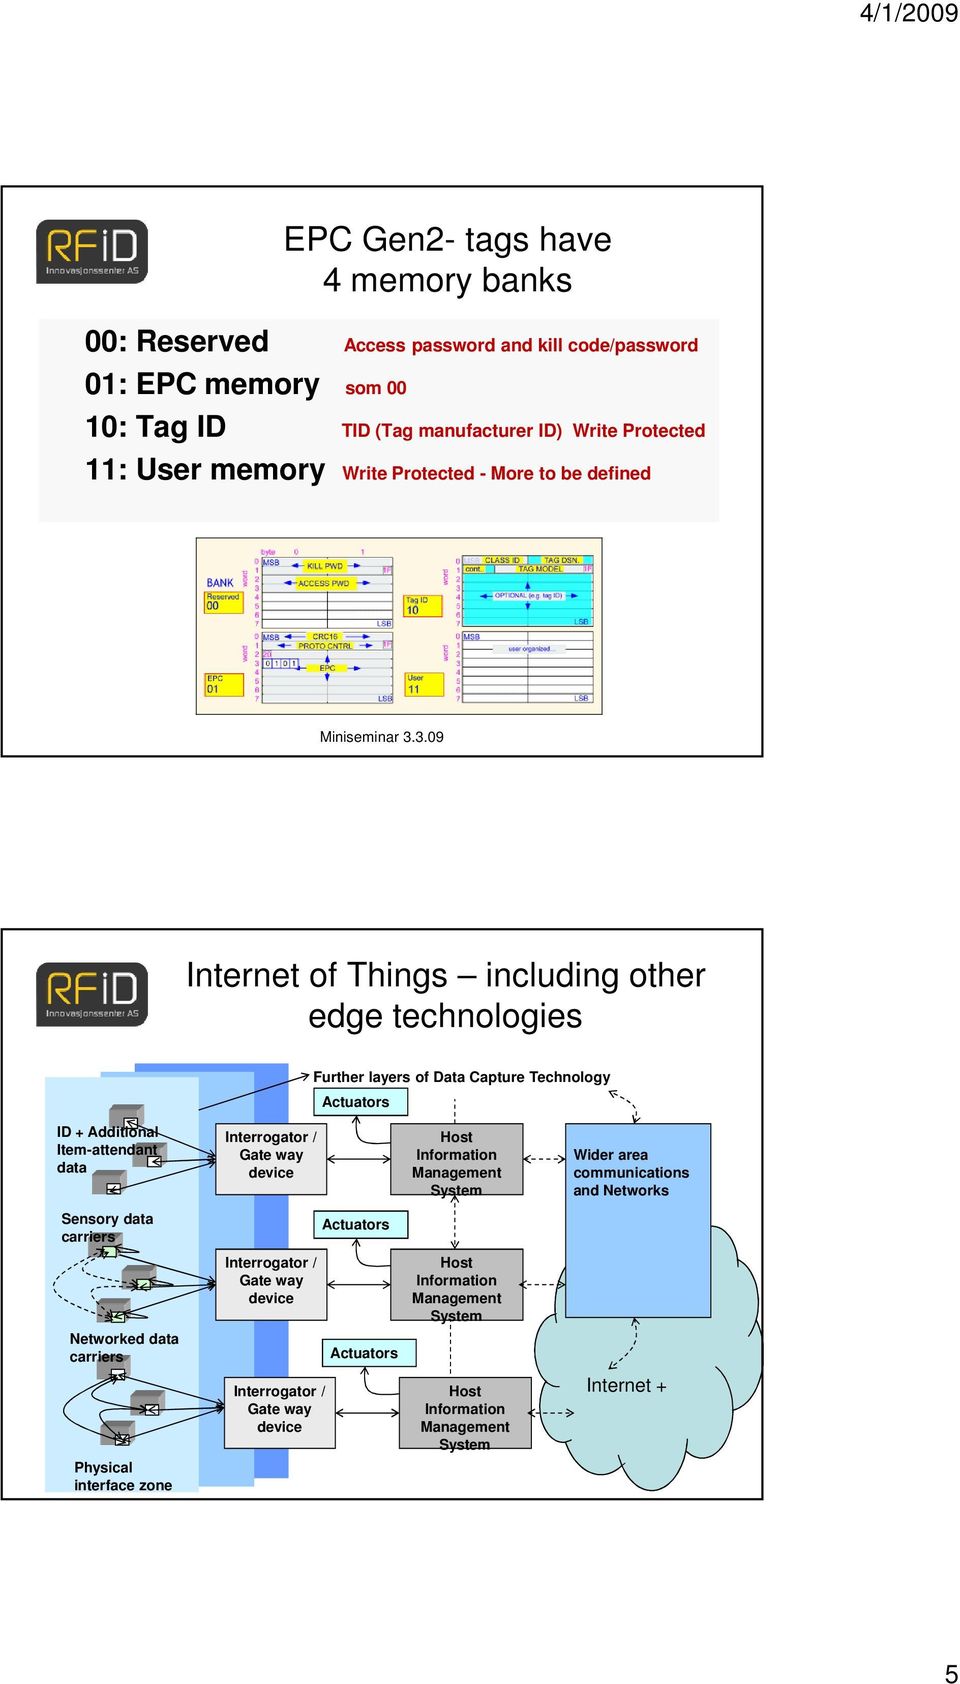 3.09 Internet of Things including other edge technologies Further layers of Data Capture Technology Actuators ID + Additional Item-attendant data Interrogator / Gate way device